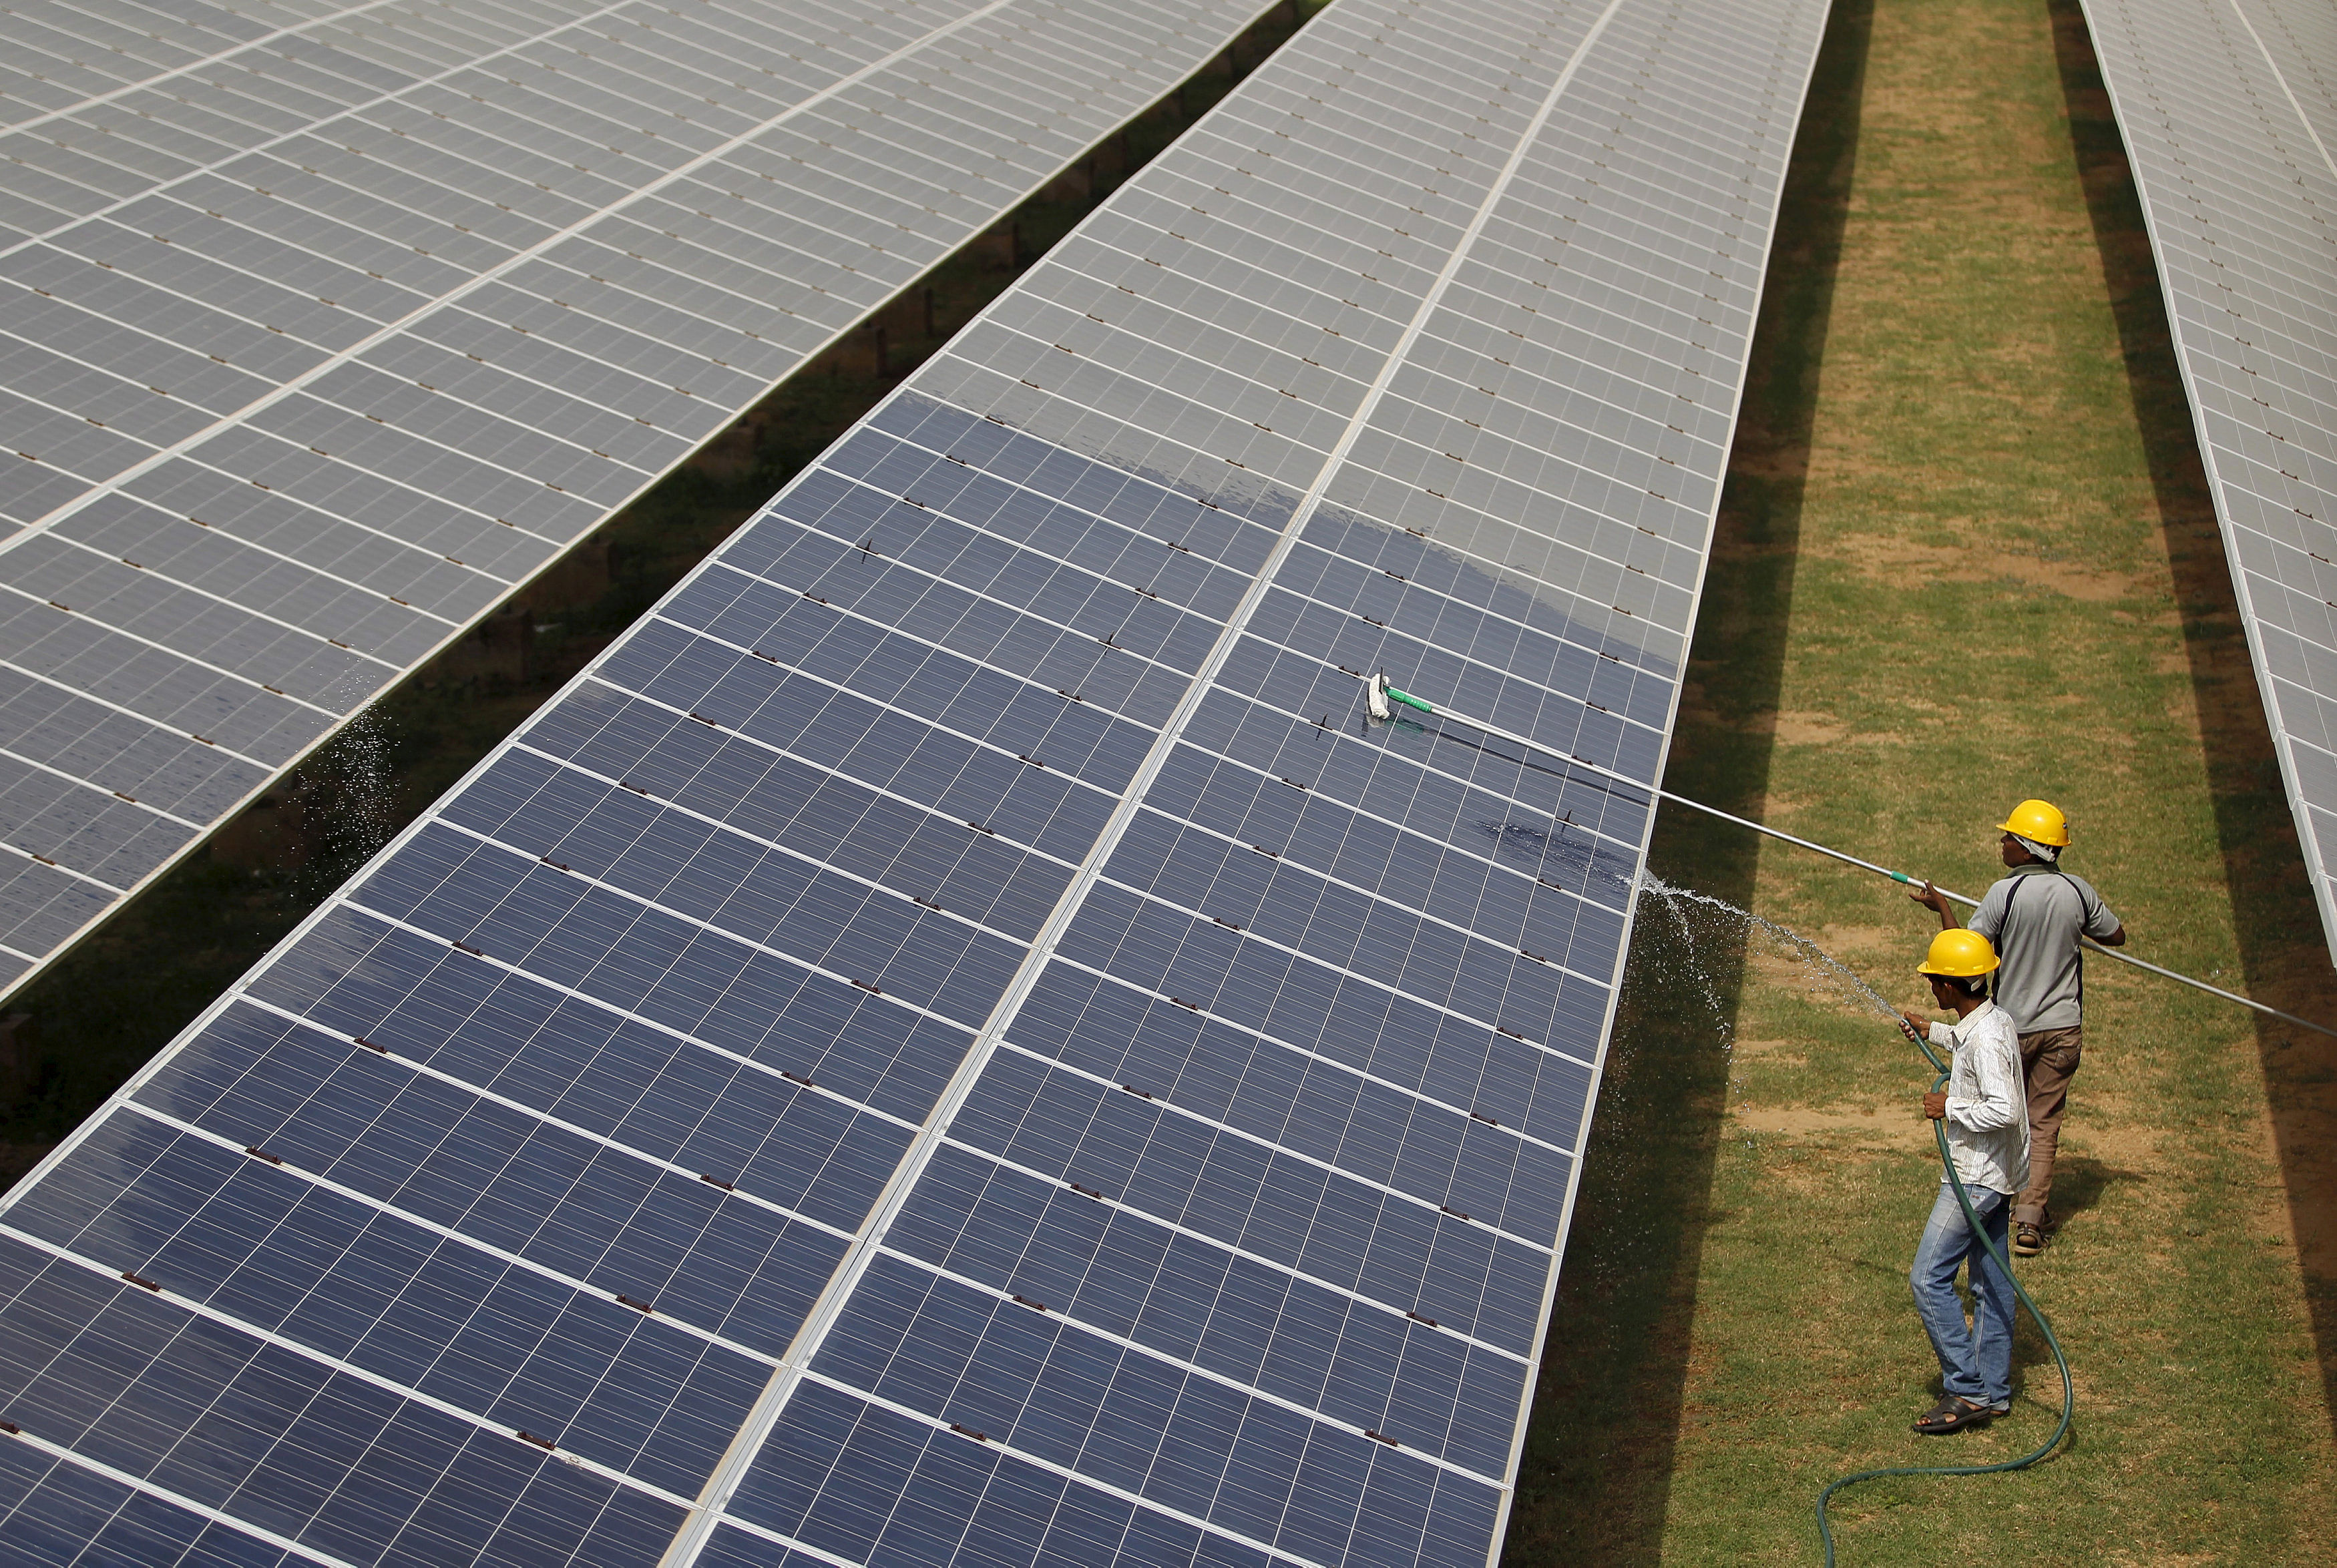  Workers clean photovoltaic panels inside a solar power plant in Gujarat, India. (Reuters)